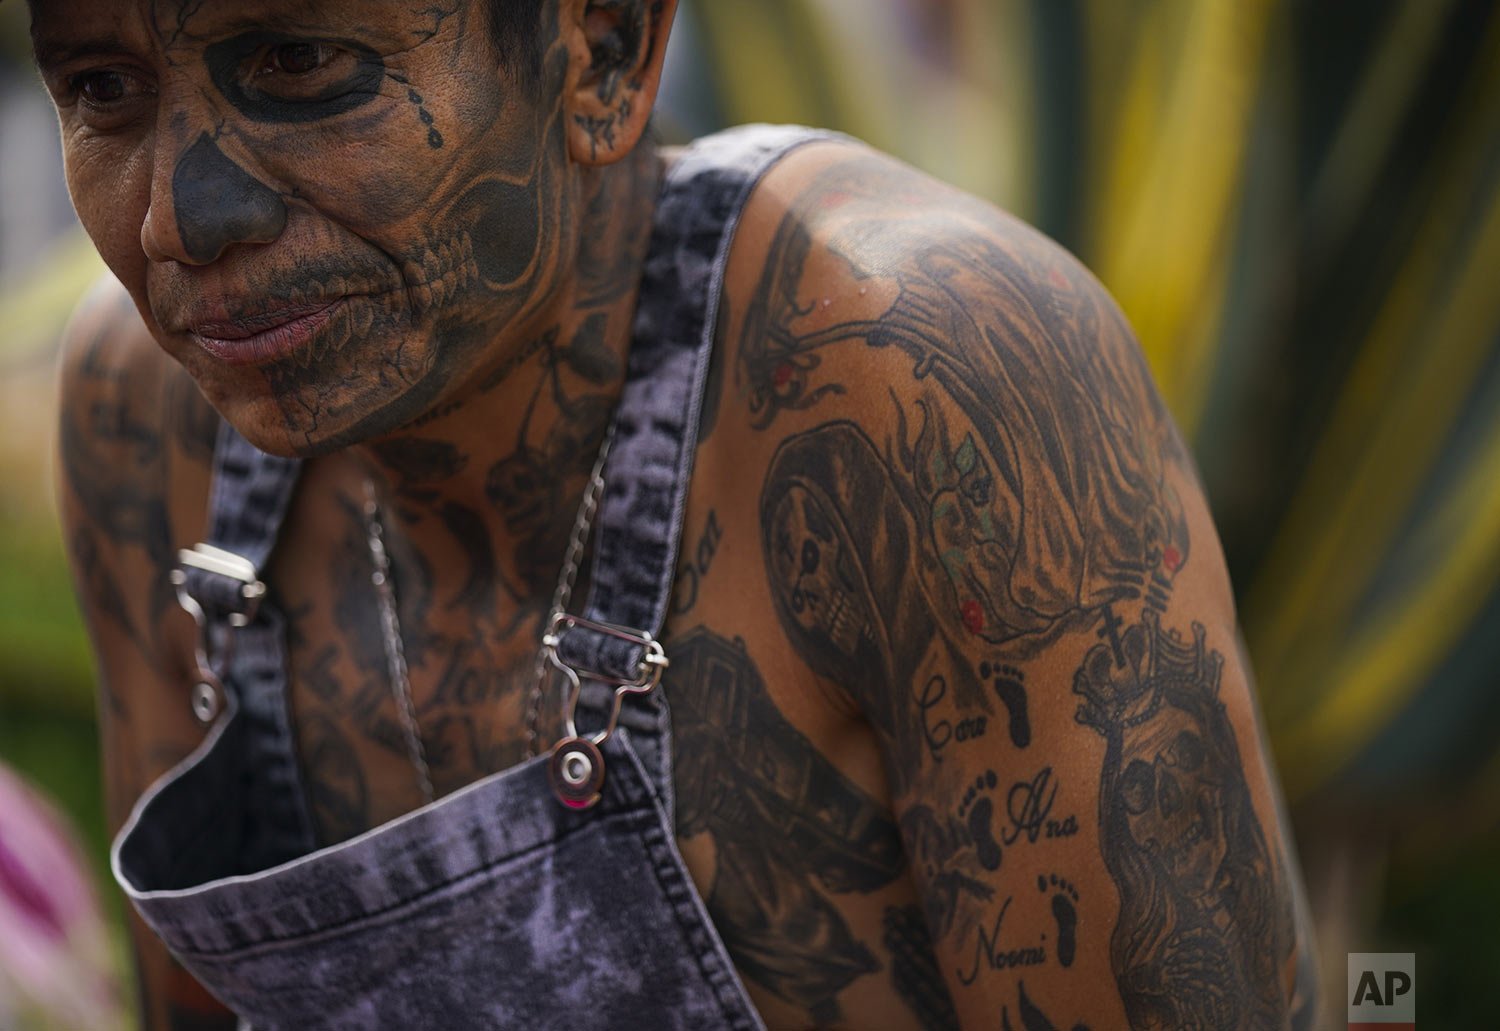  A devotee wears tattoos of "Nuestra Señora de la Santa Muerte," or Our Lady of Holy Death, as he waits in line to enter her altar in Mexico City's Tepito neighborhood, Tuesday, Nov. 1, 2022. (AP Photo/Fernando Llano) 